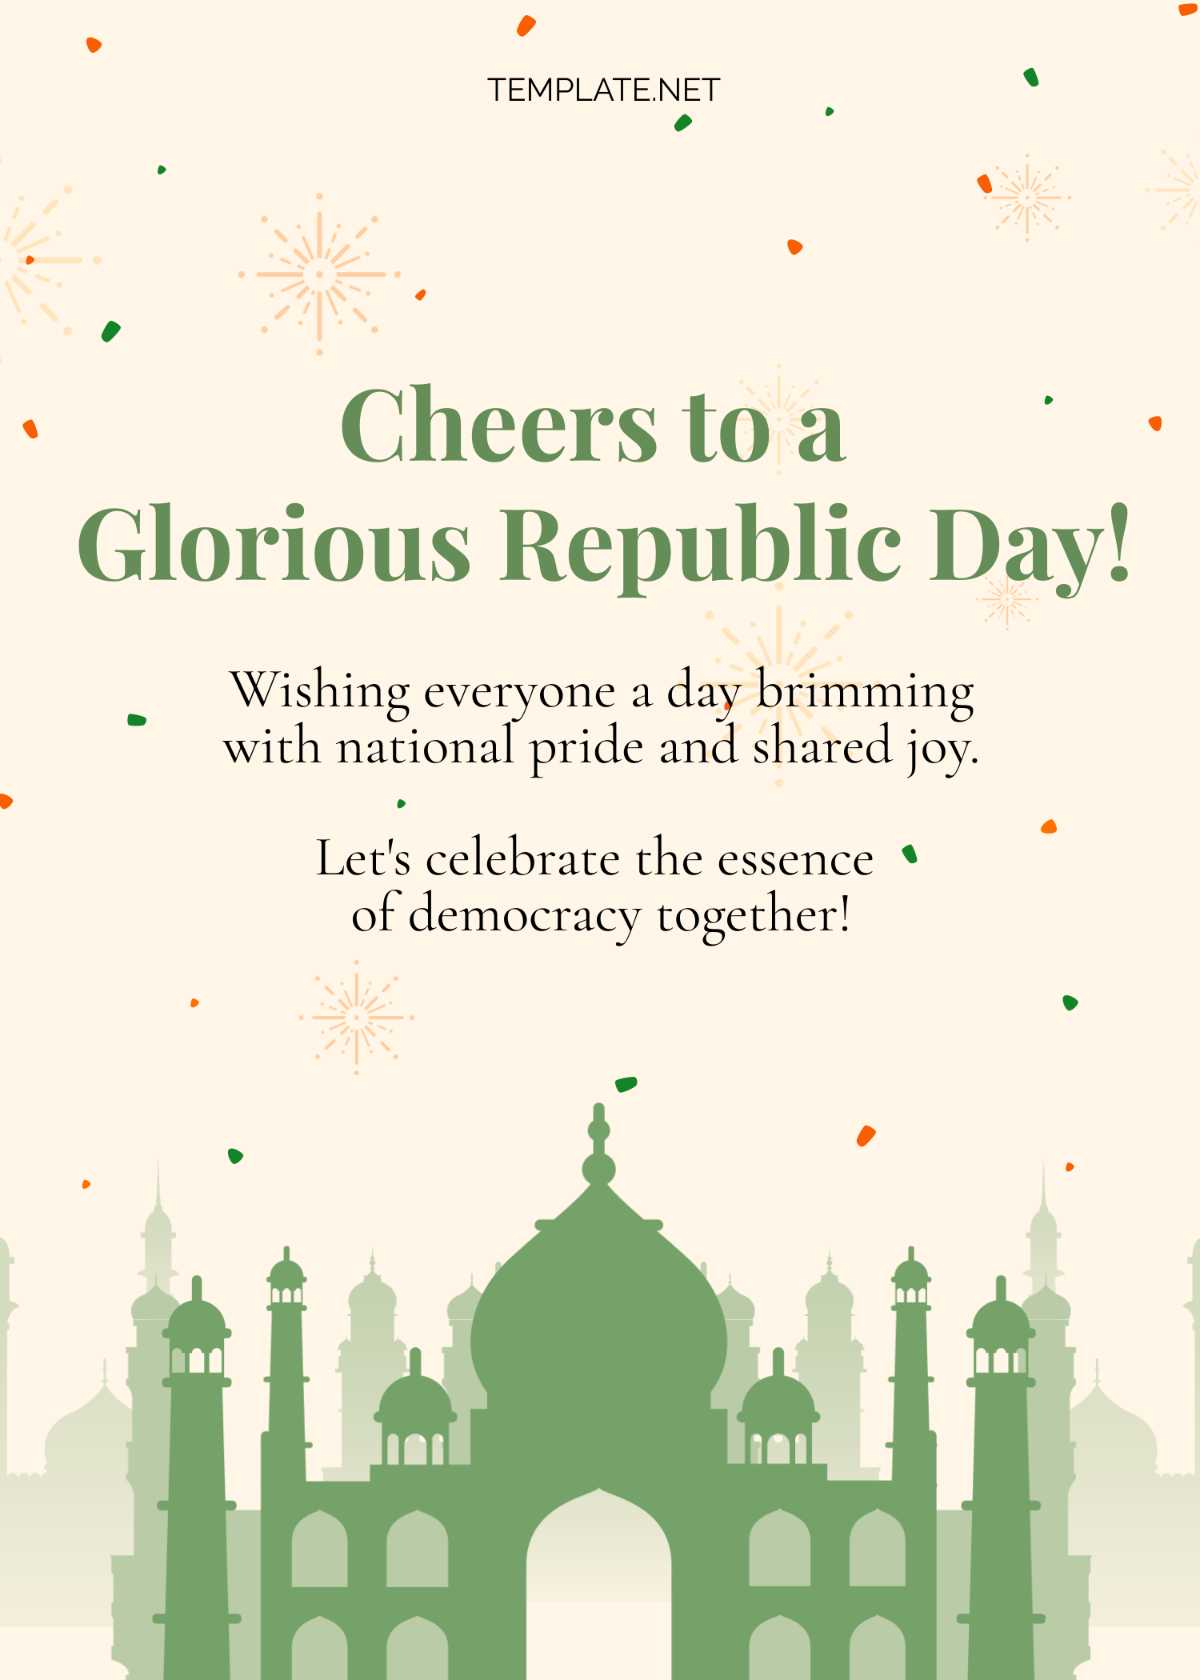 Happy Republic Day Wishes Template